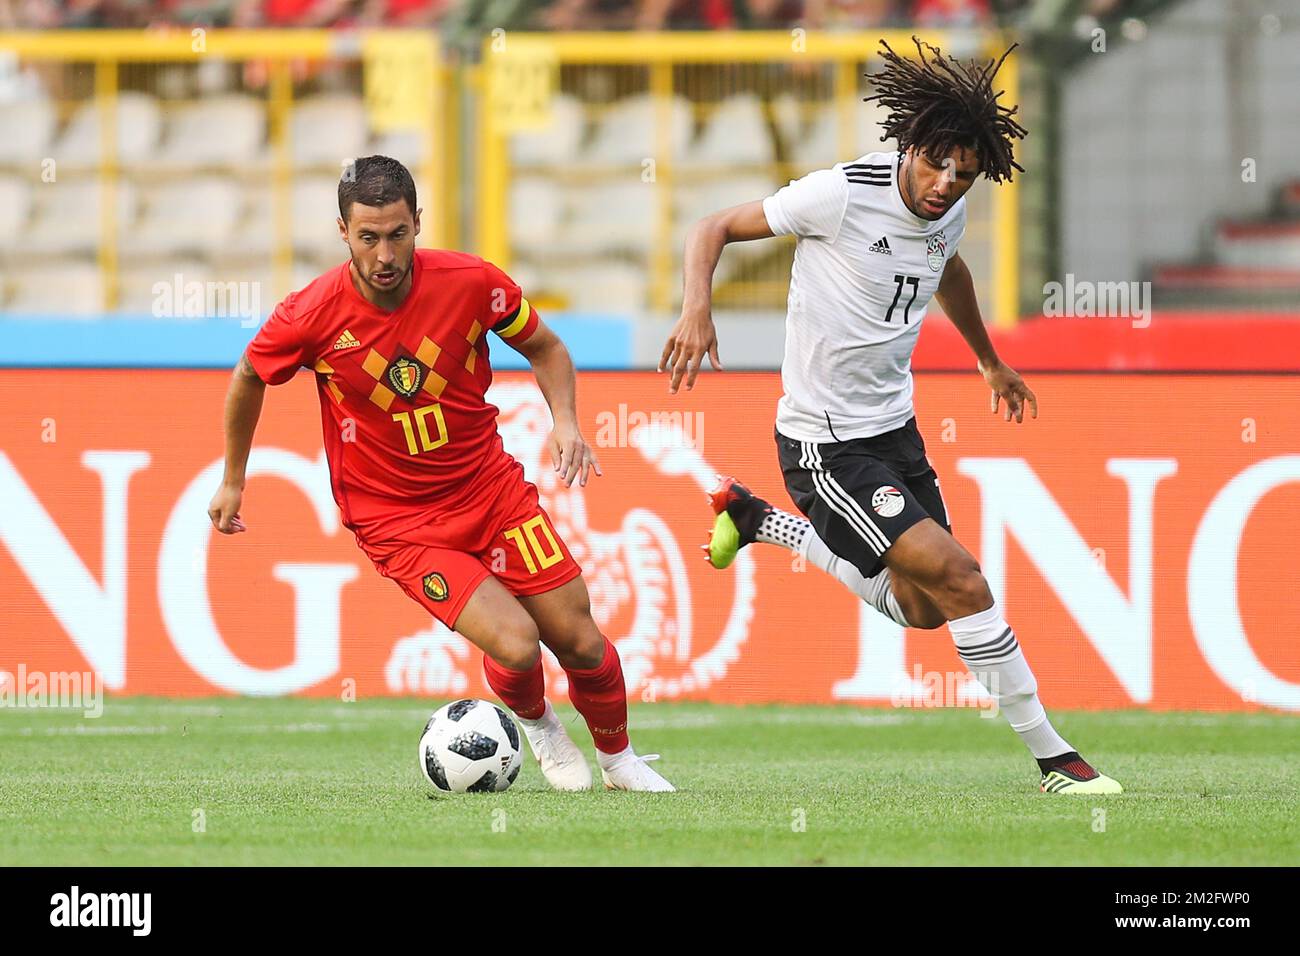 Belgium's Eden Hazard and Egypt's Kahraba fight for the ball during a friendly game between Belgium national team, The Red Devils and Egyptian national soccer team, Wednesday 06 June 2018, in Brussels. Both teams prepare the upcoming FIFA World Cup 2018 in Russia. BELGA PHOTO BRUNO FAHY Stock Photo